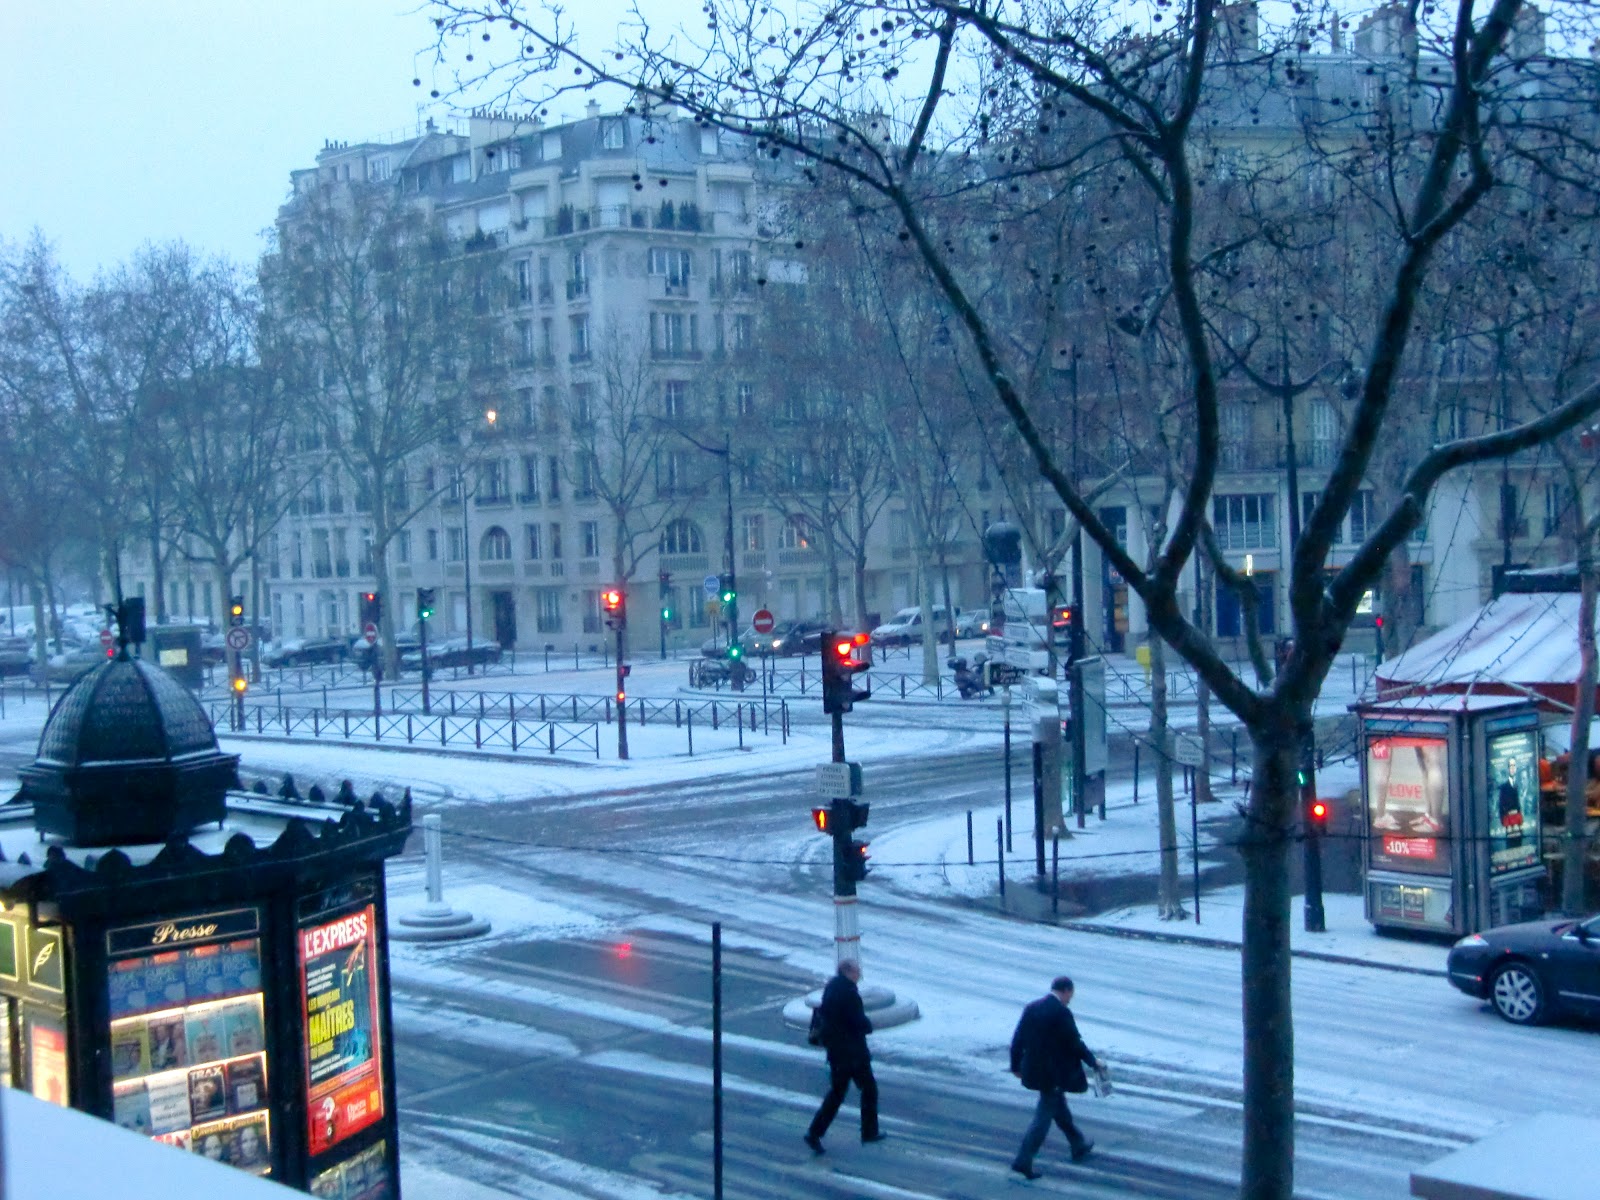 Pattersons in Paris: Snowy Sunday